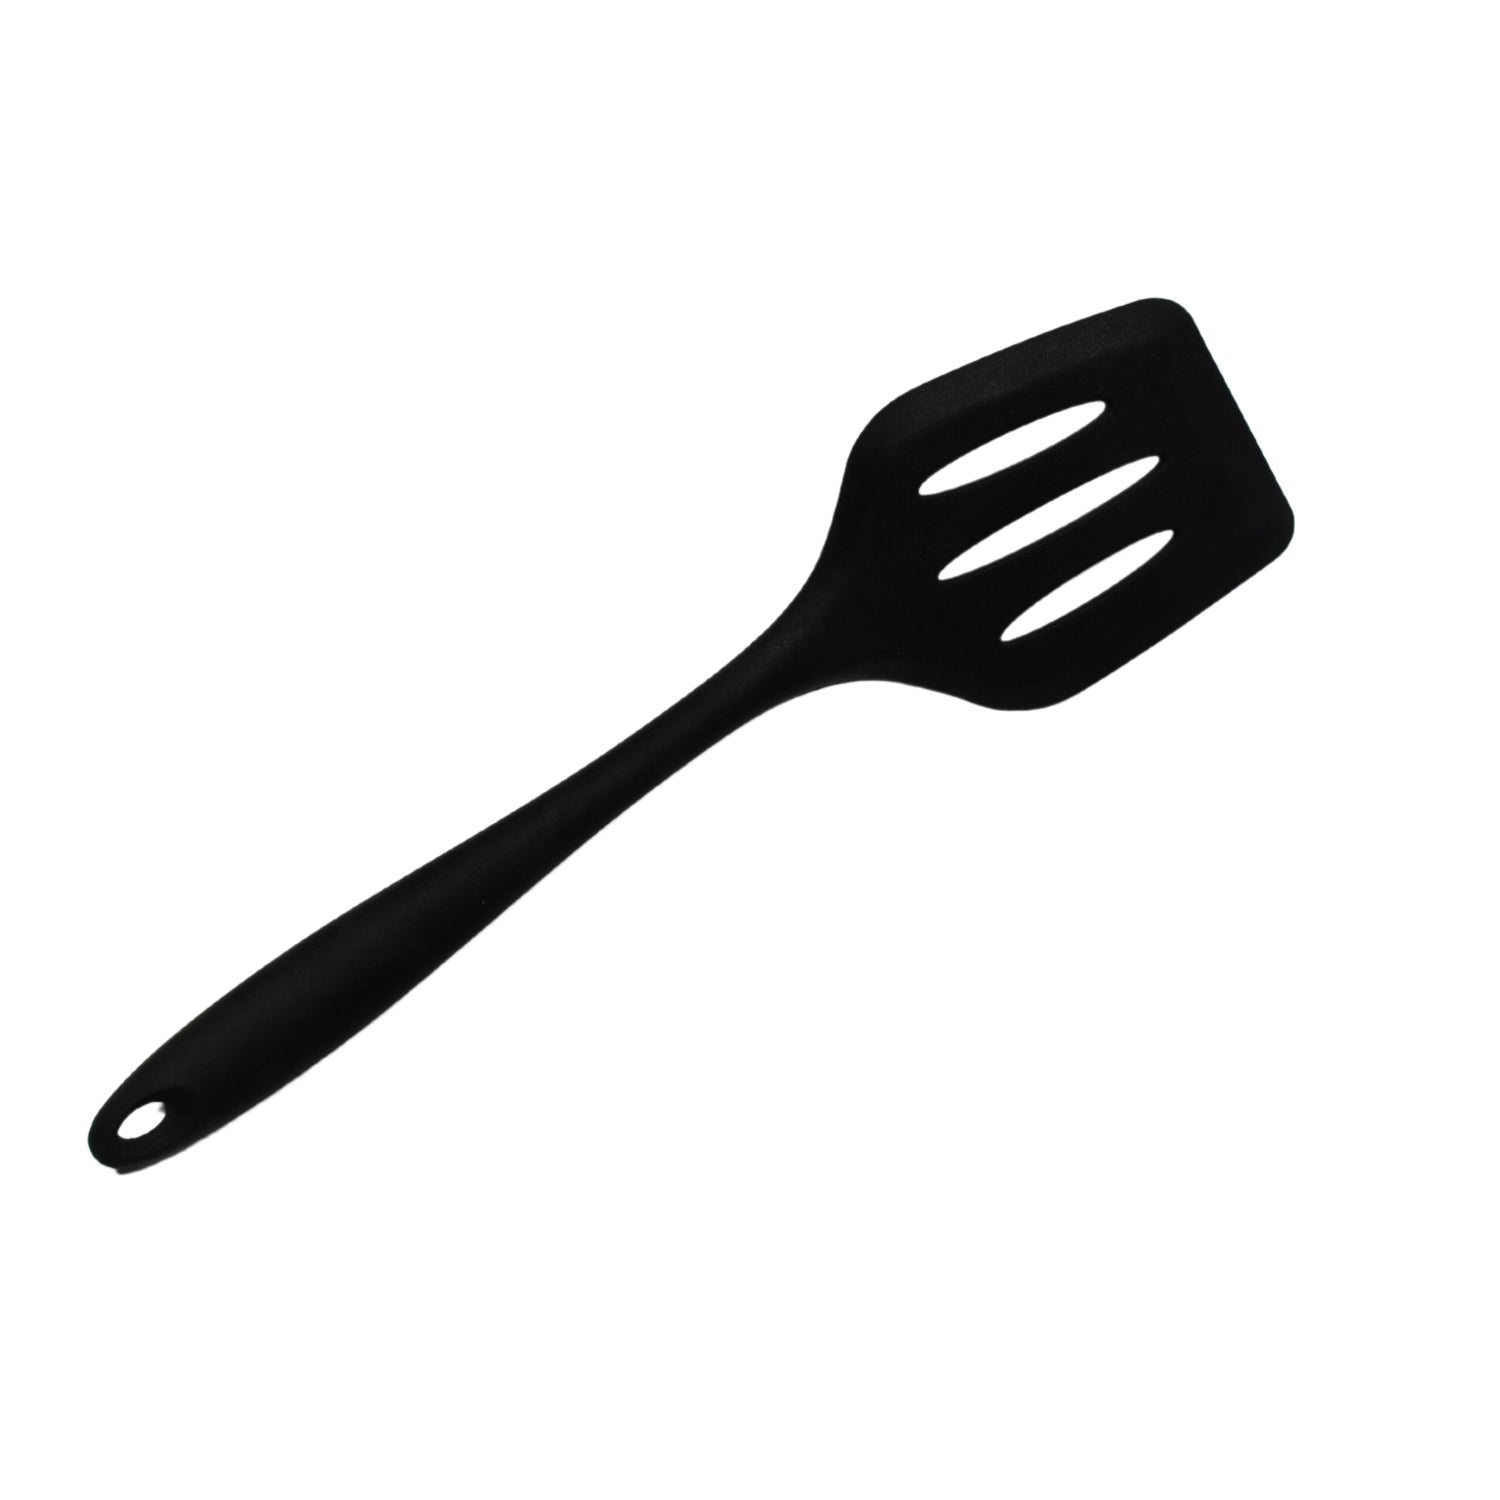 5408 Silicone Slotted Spatula, Non Stick Kitchen Turners, High Heat Resistant BPA Free Kitchen Utensils, Ideal Cookware for Fring Fish, Eggs, Meat, Dukandaily